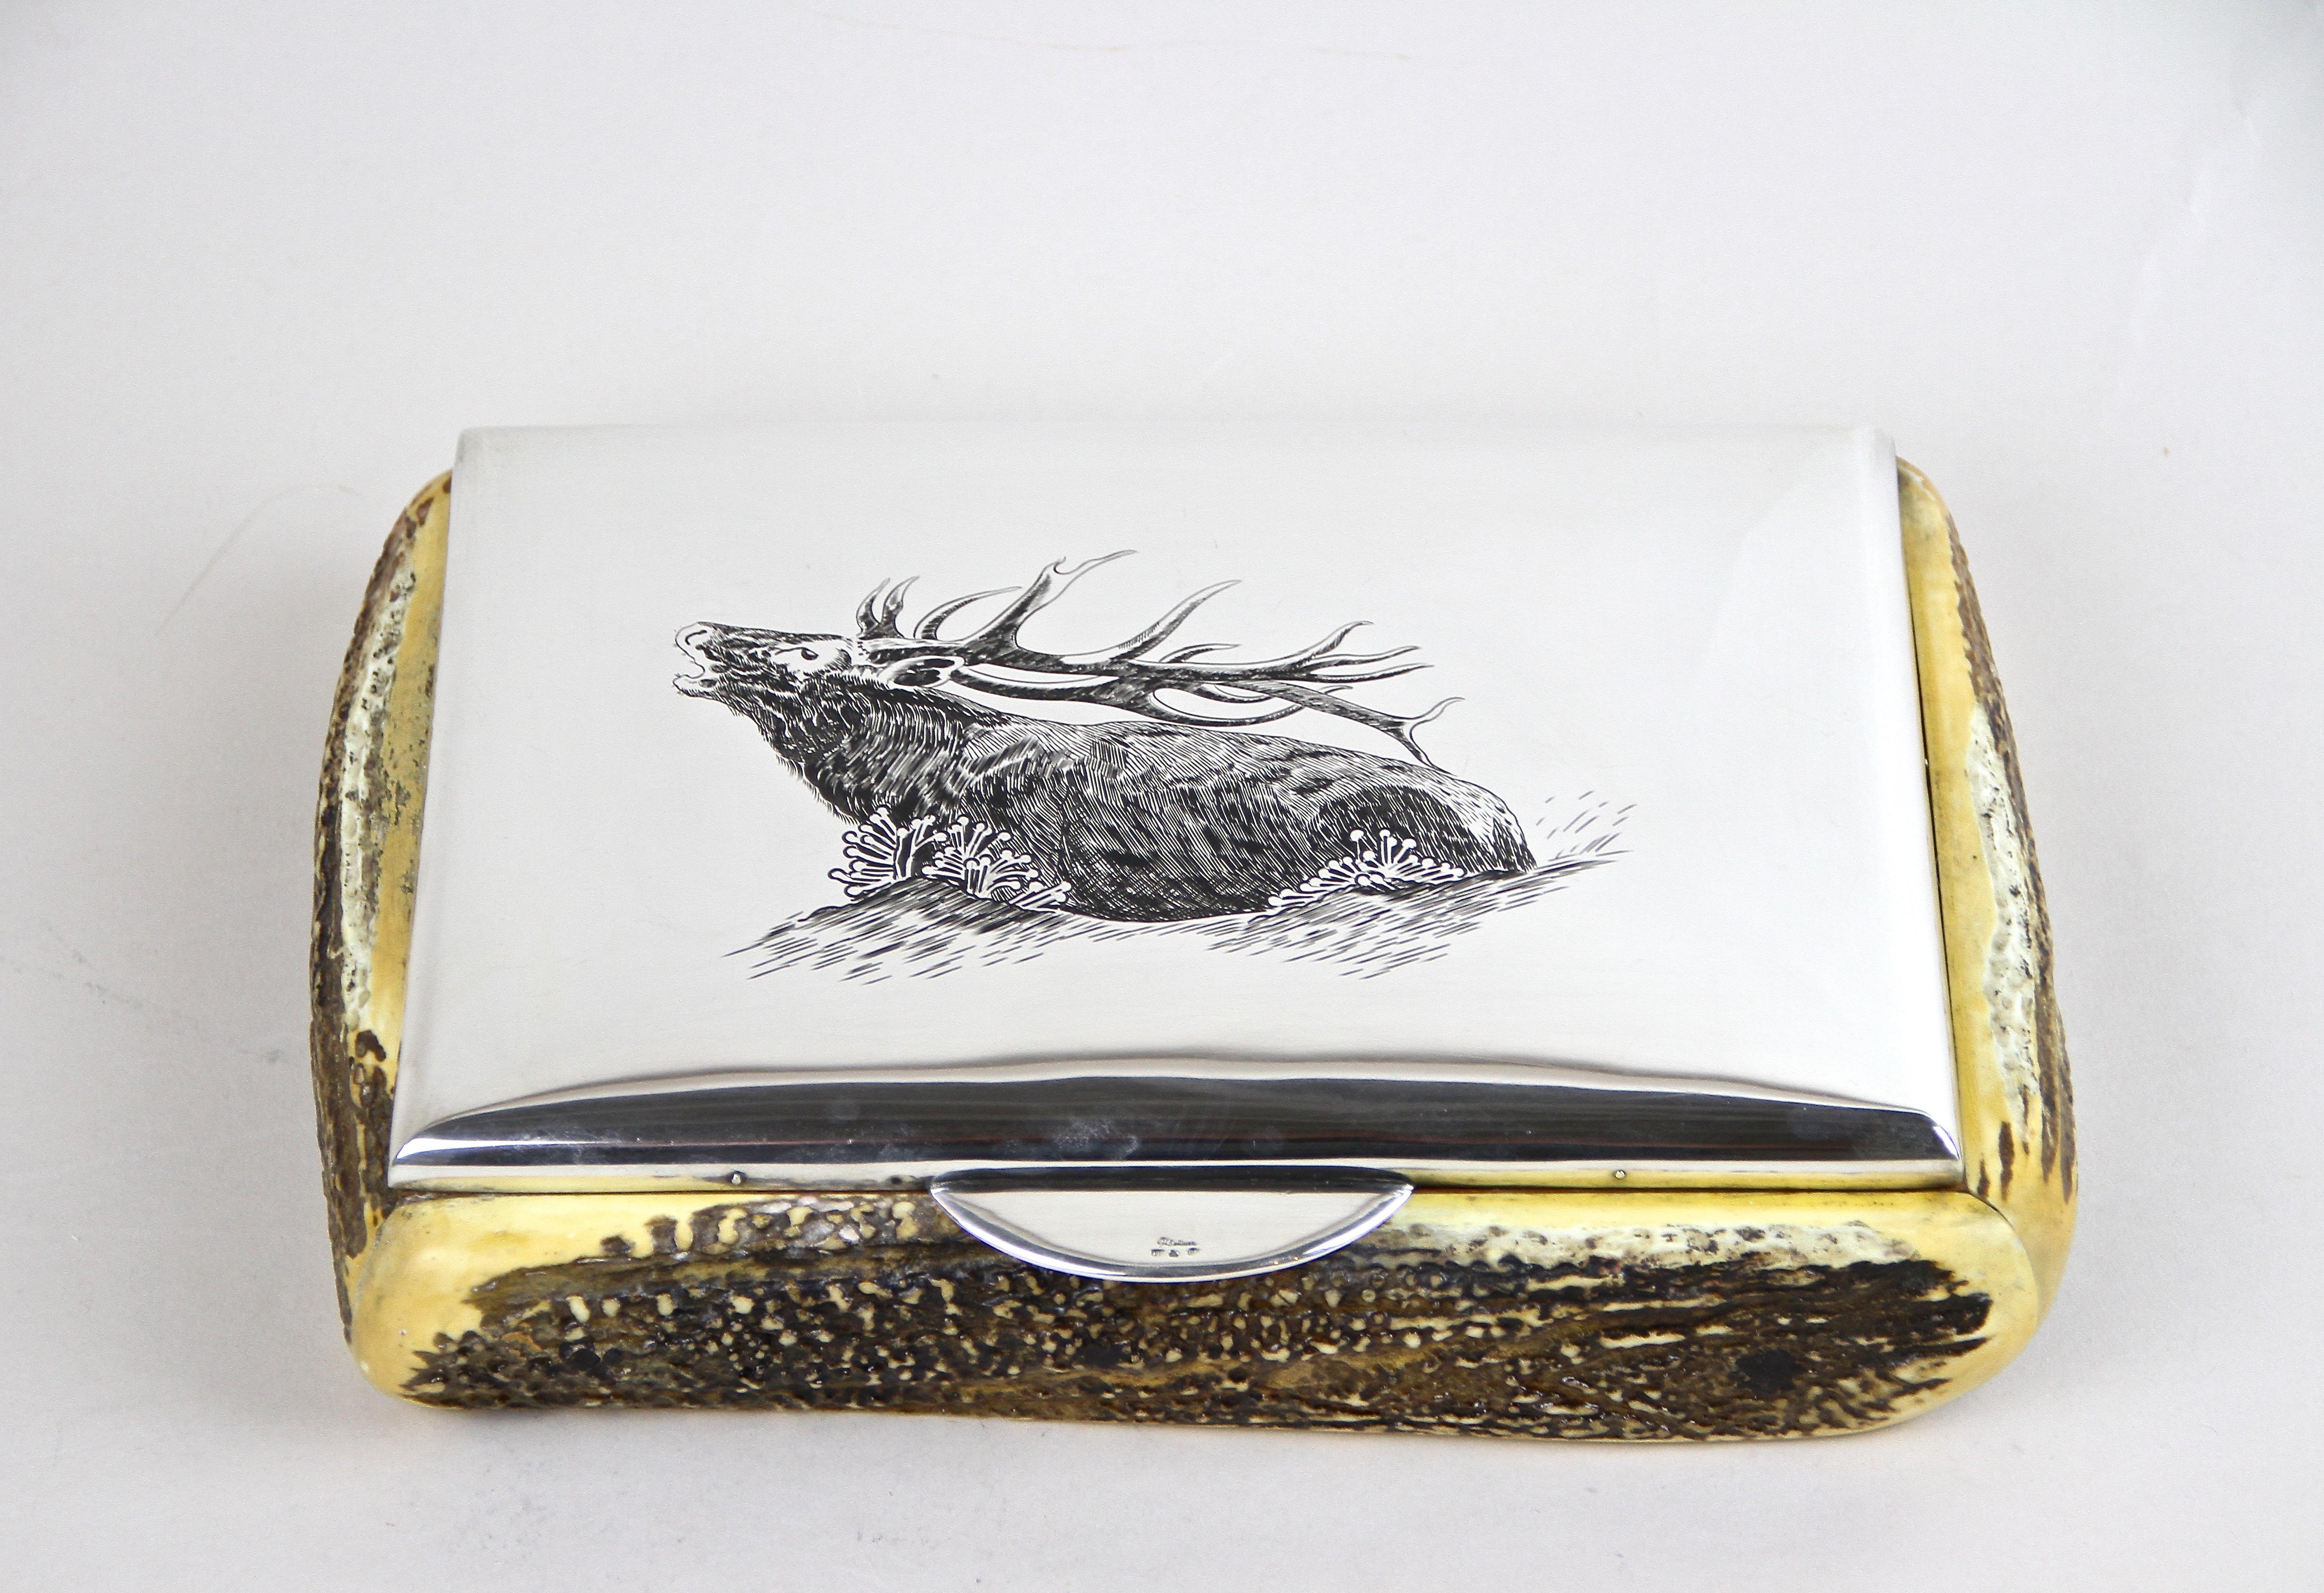 Extraordinary silver box with deer antler coverings elaborately made out of fine 900 Silver in Austria around 1920. This absolutely unique, hunting style box impress with gorgeous worked deer antler coverings and an amazing finely chased depiction